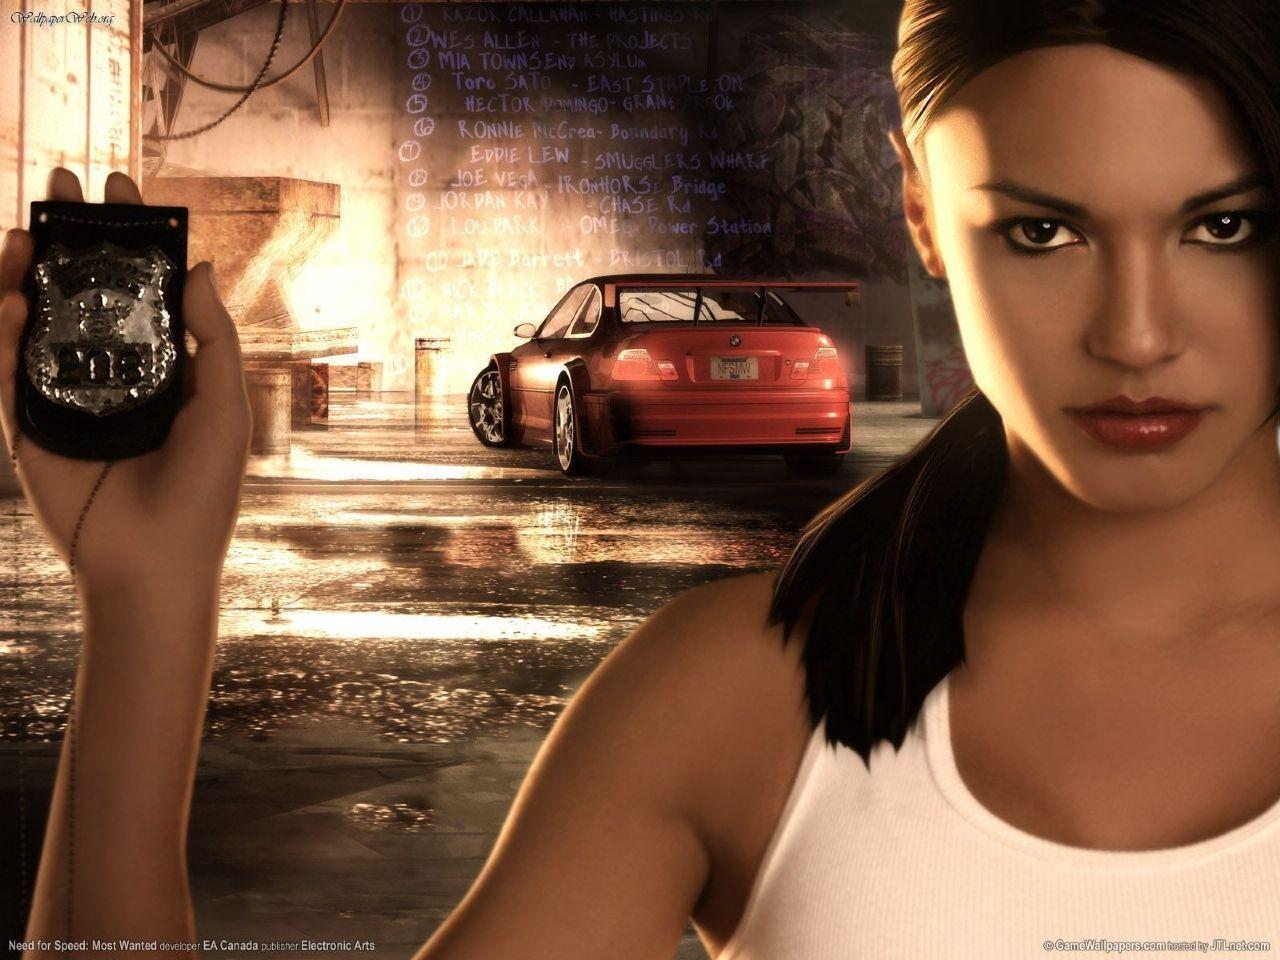 Games: Need For Speed: Most Wanted, picture nr. 30056